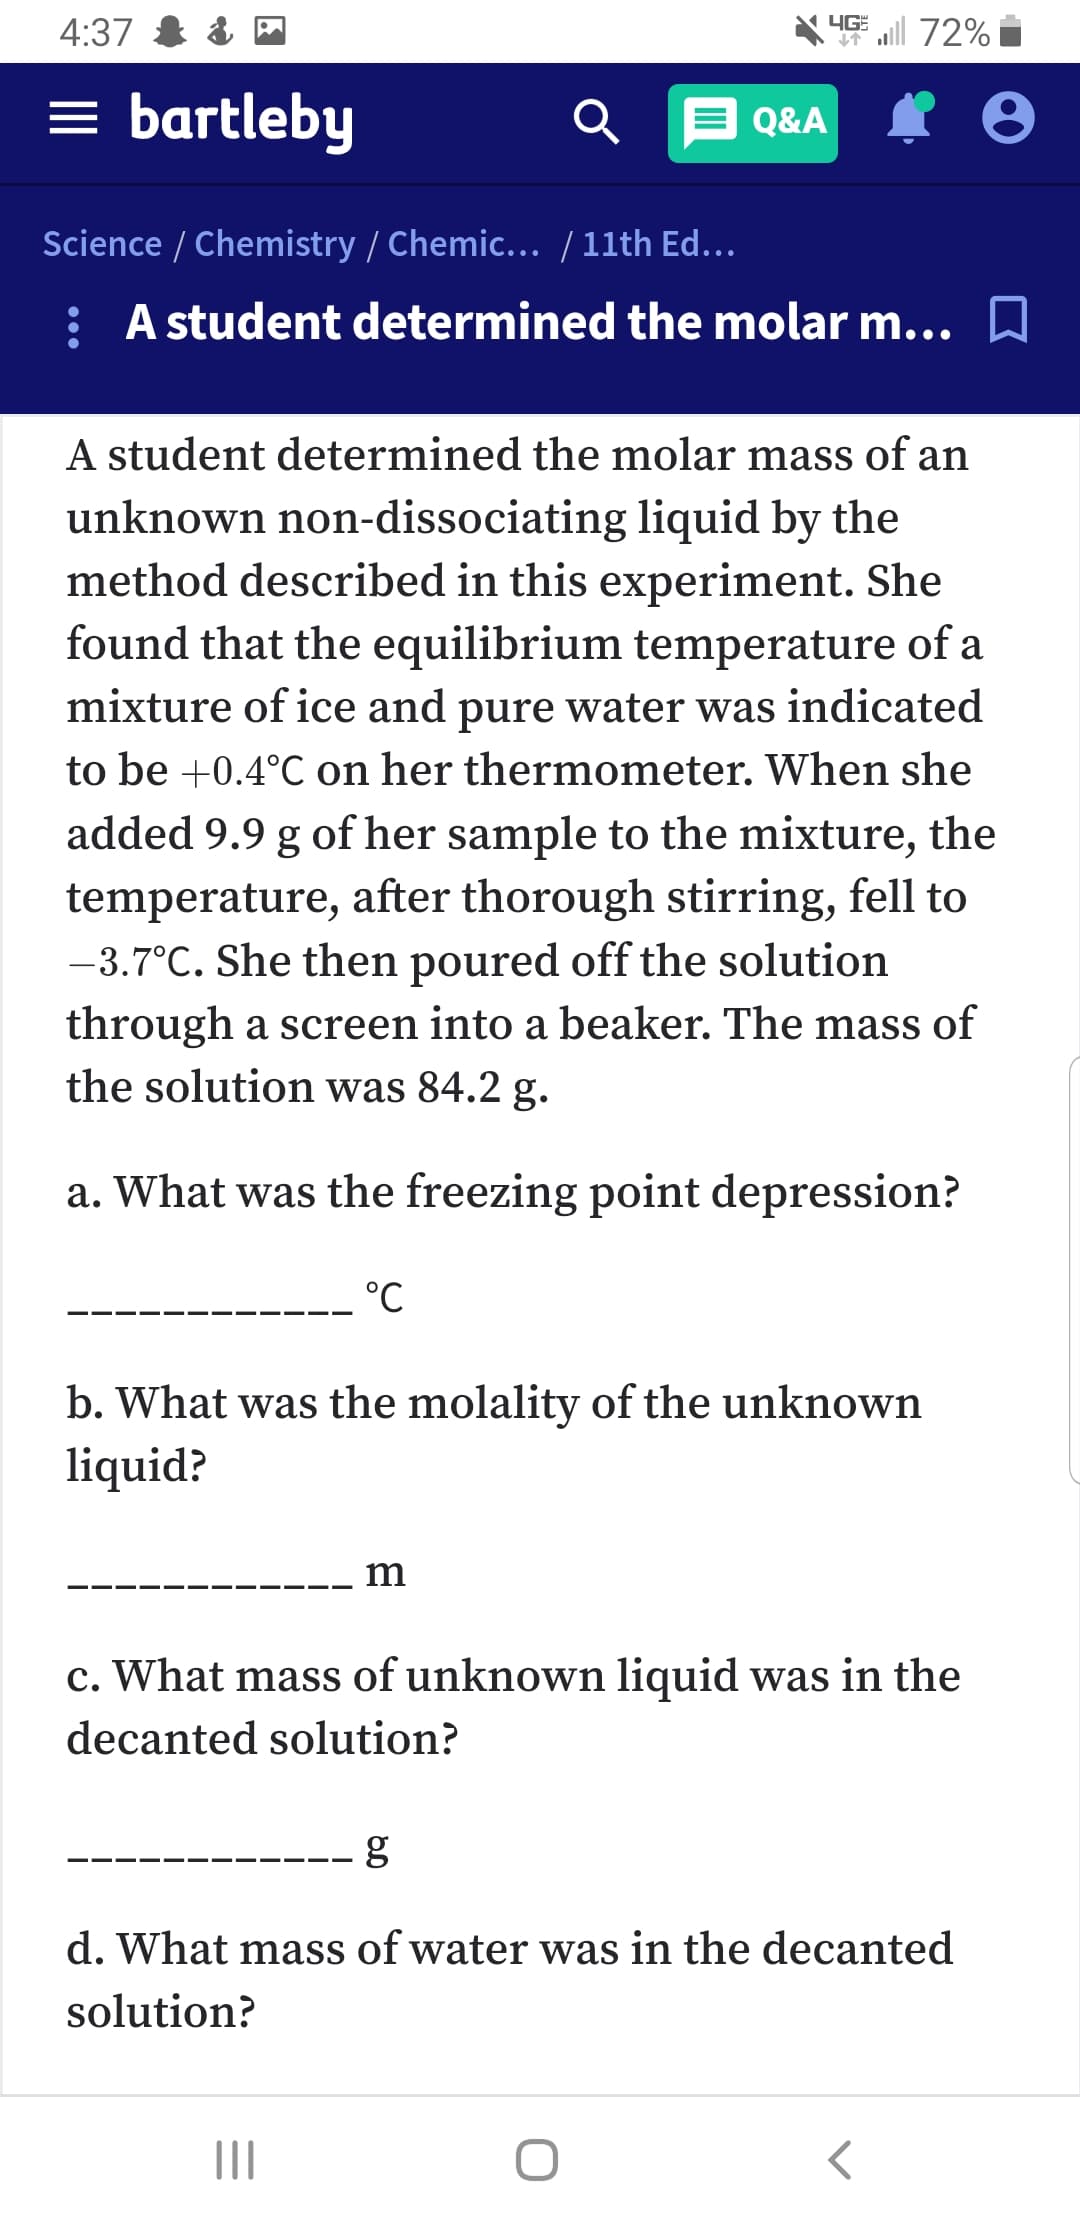 4G 72%
4:37
= bartleby
Q&A
Science / Chemistry / Chemic... / 11th Ed...
: A student determined the molar m... A
A student determined the molar mass of an
unknown non-dissociating liquid by the
method described in this experiment. She
found that the equilibrium temperature of a
mixture of ice and pure water was indicated
to be +0.4°C on her thermometer. When she
added 9.9 g of her sample to the mixture, the
temperature, after thorough stirring, fell to
-3.7°C. She then poured off the solution
through a screen into a beaker. The mass of
the solution was 84.2 g.
a. What was the freezing point depression?
°C
b. What was the molality of the unknown
liquid?
m
c. What mass of unknown liquid was in the
decanted solution?
d. What mass of water was in the decanted
solution?
